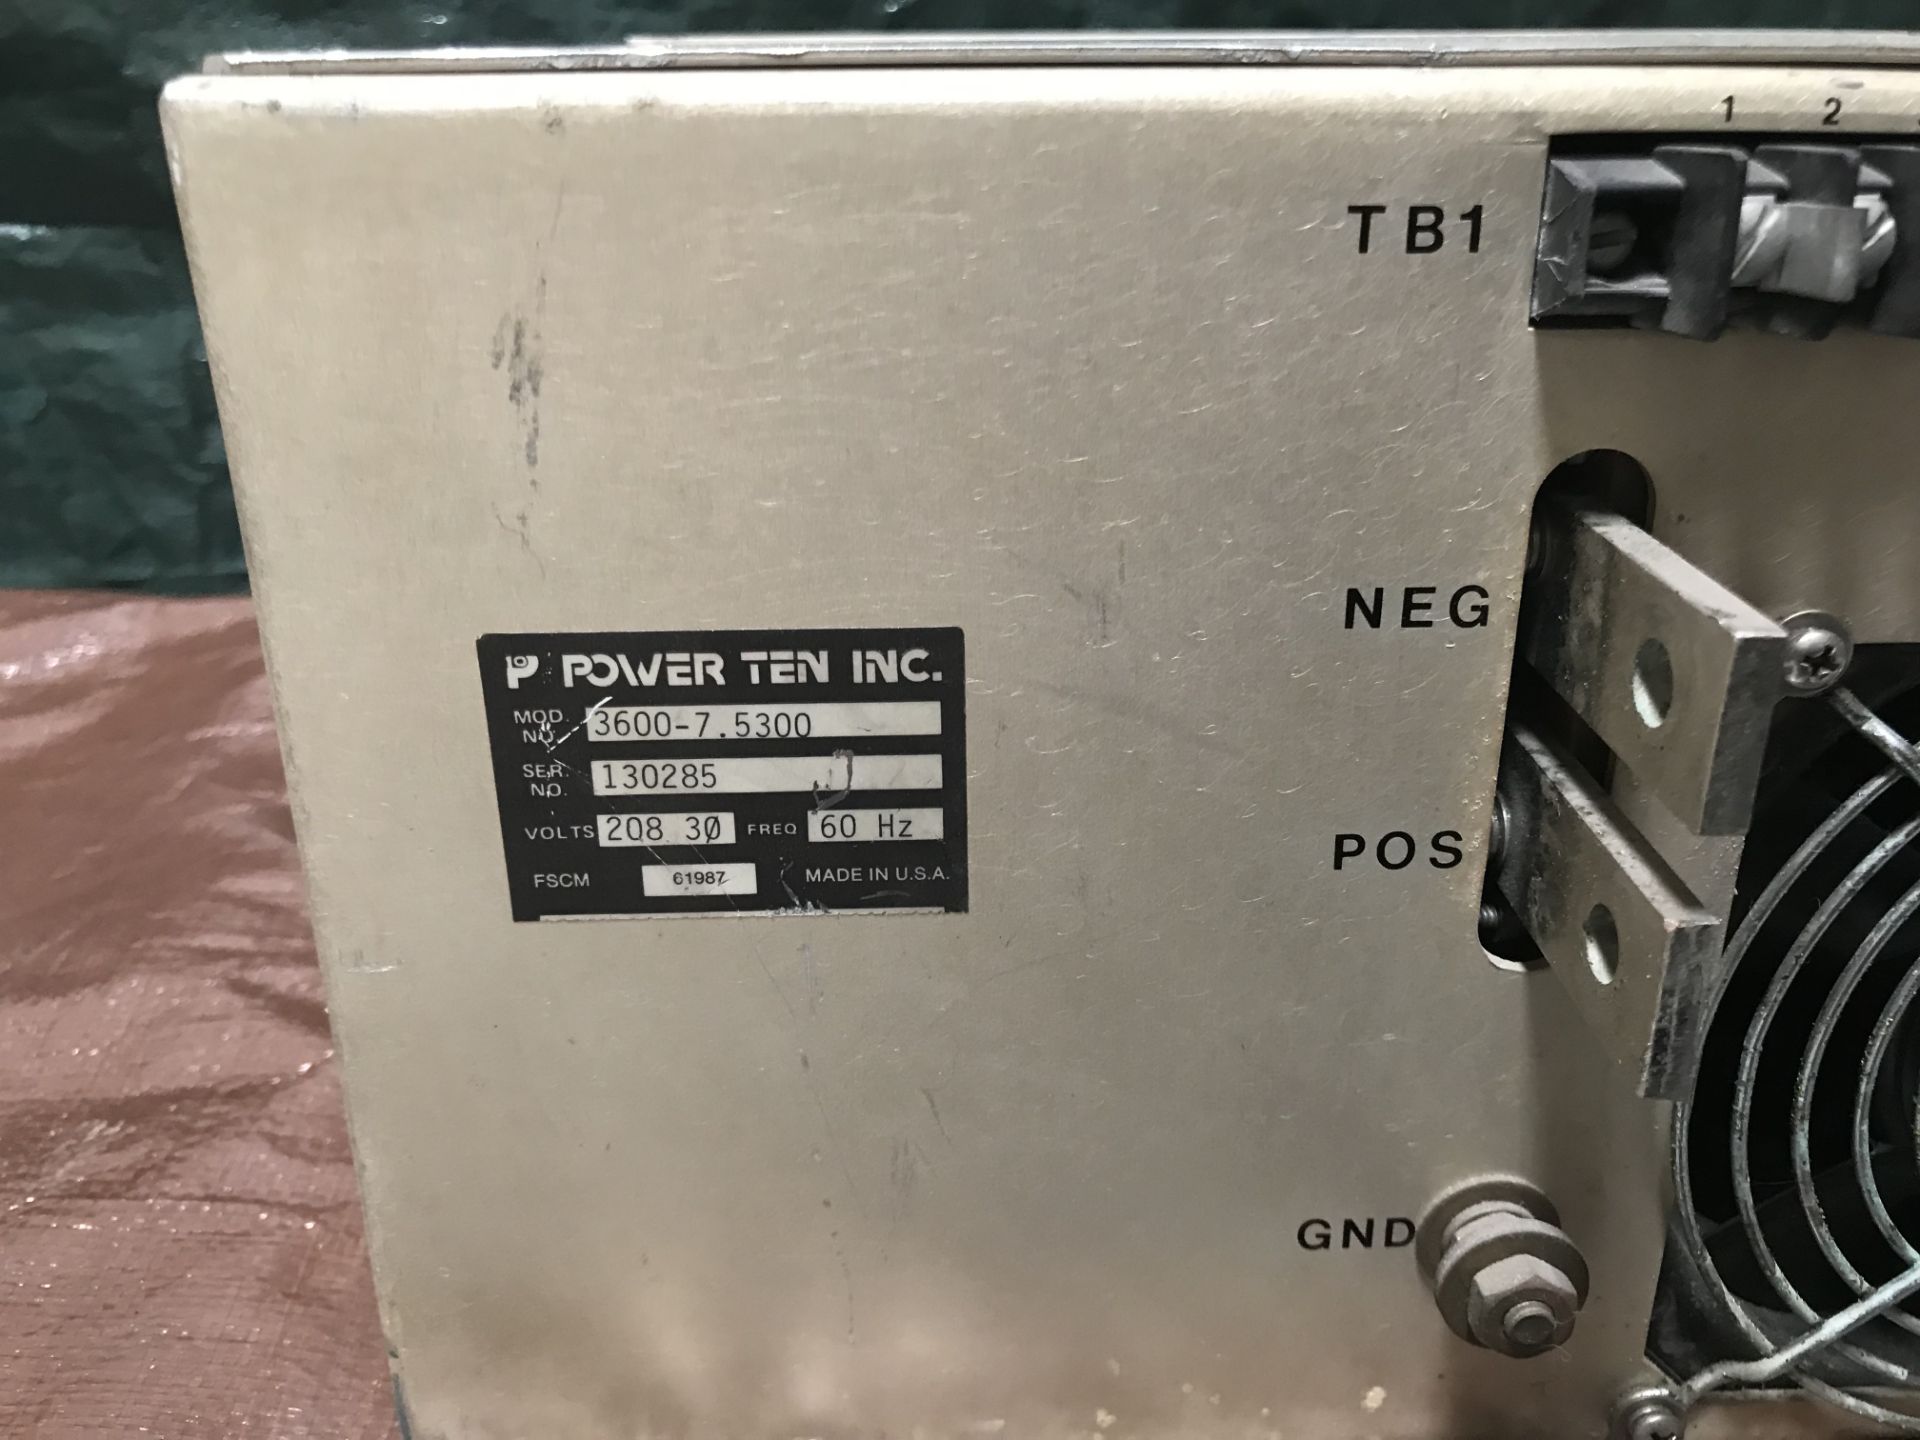 #080 Power Ten Inc. Model: 3600-7.5300, SN: 130285, Input: 208VAC 3Phase 60Hz, Output: 0-7.5VDC/300A - Image 7 of 8